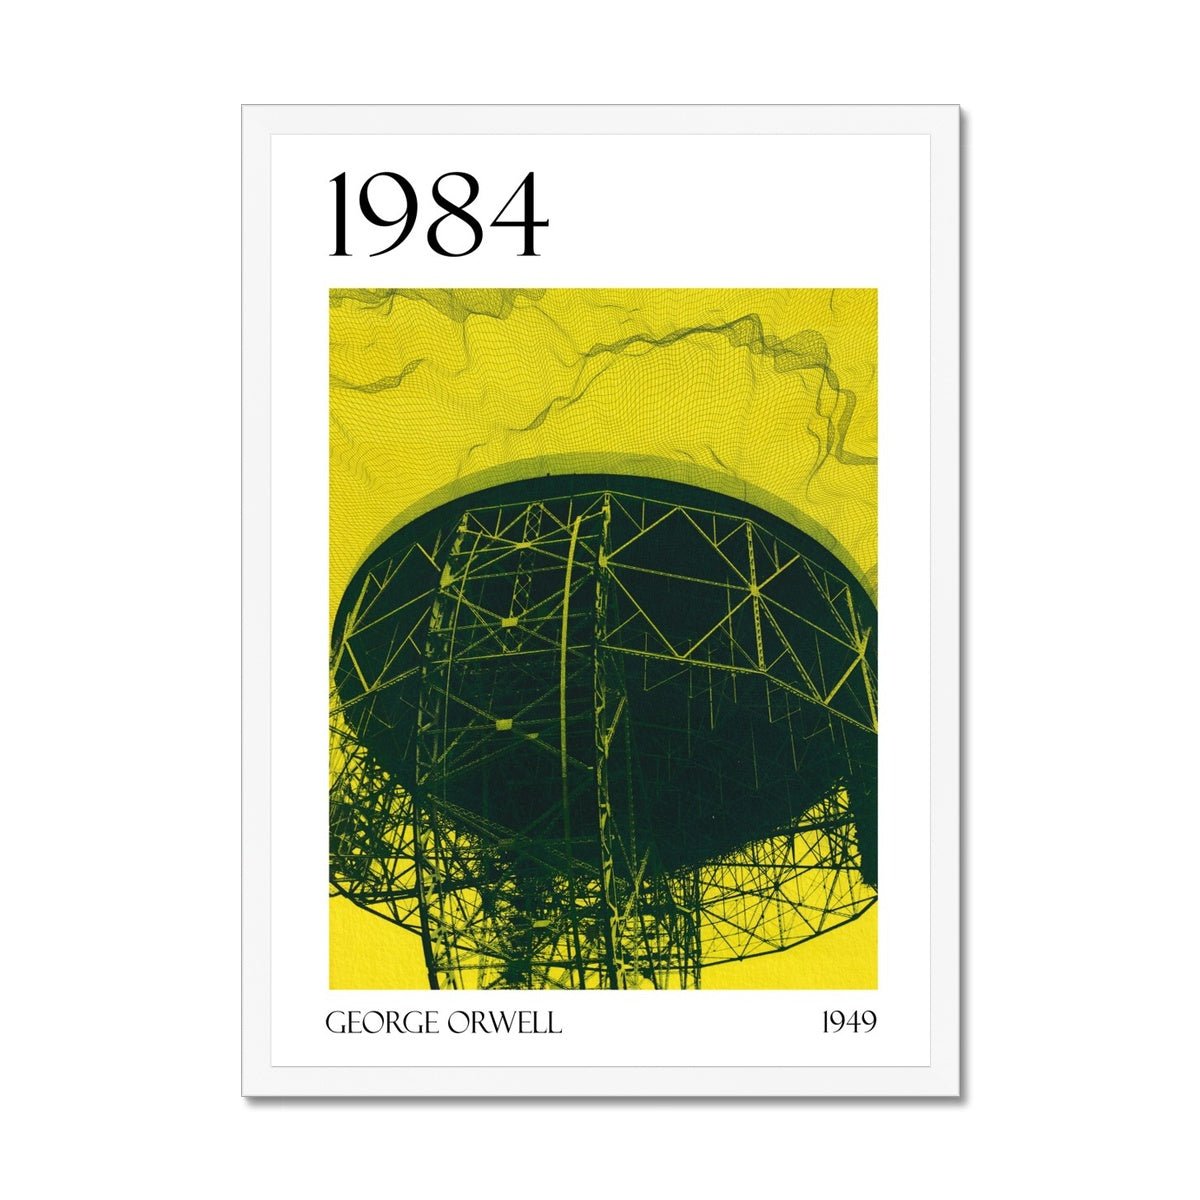 A white framed fine art print of George Orwell's 1984 "Big Brother is Listening" showing the Lovell Telescope on yellow background